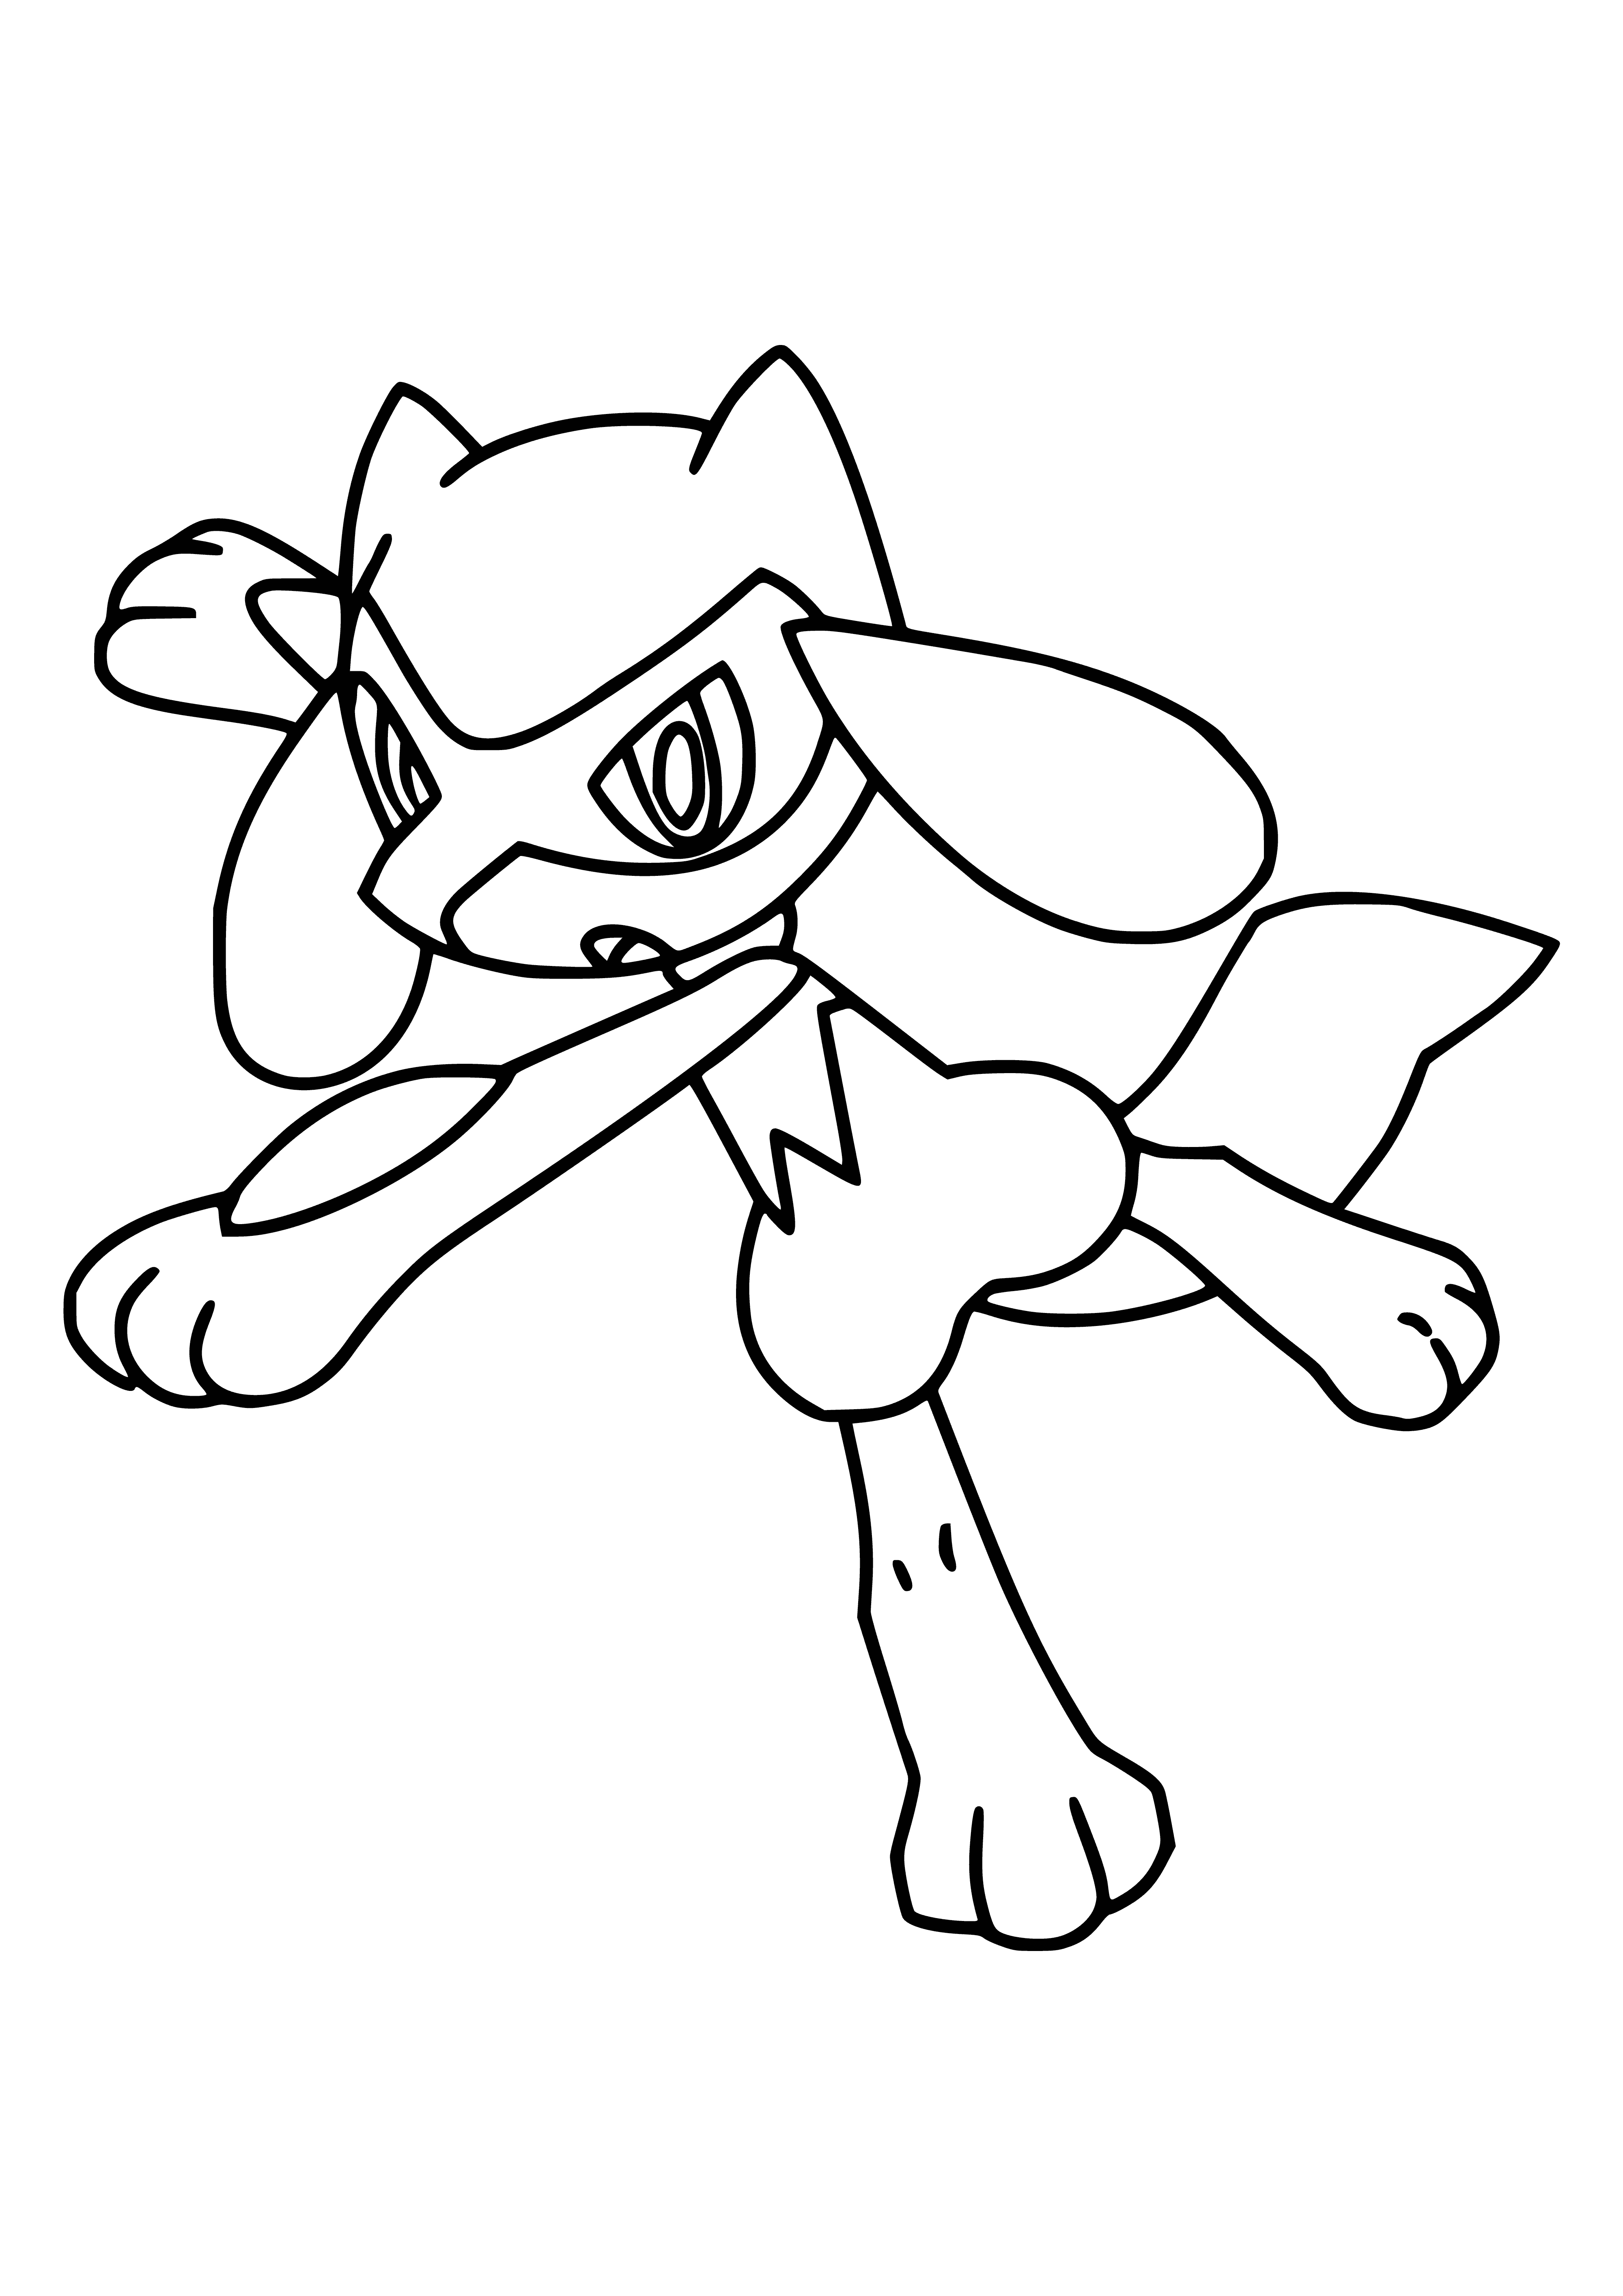 coloring page: Blue fox-like Pokémon w/ black band, pointed ears, tail tip, mark on forehead, red eyes, small black hands/feet.